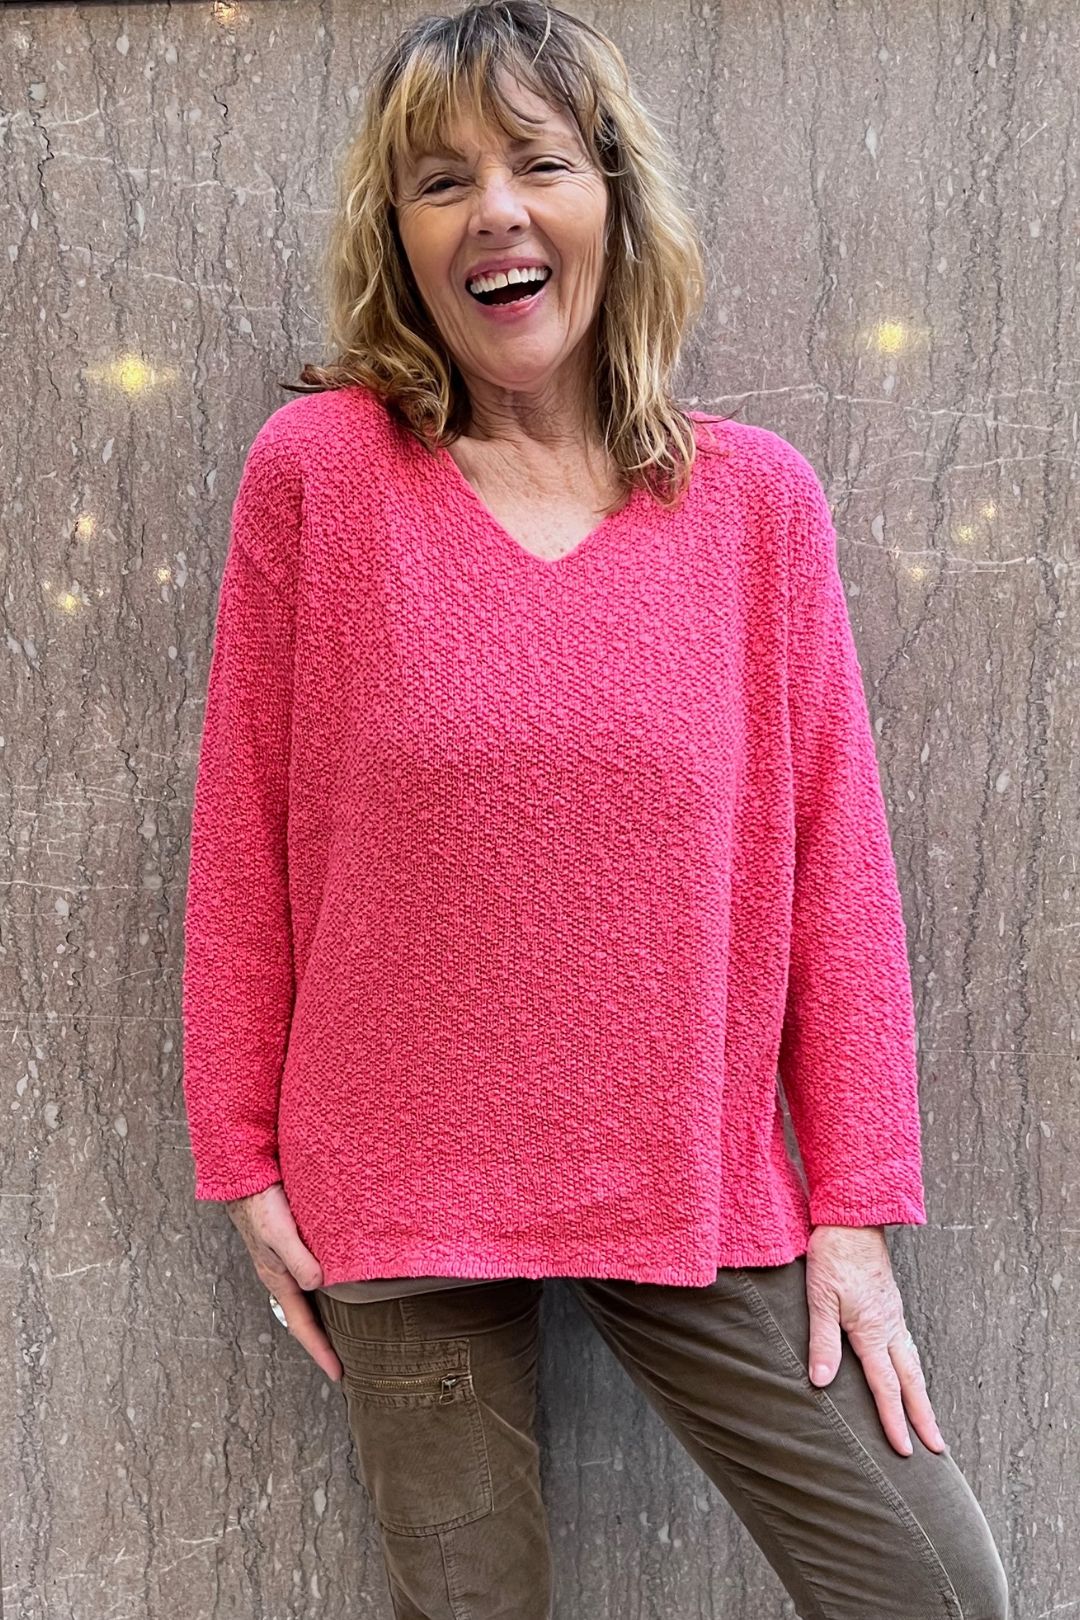 The Ultimate Cotton Sweater - Seed Stitch V Neck